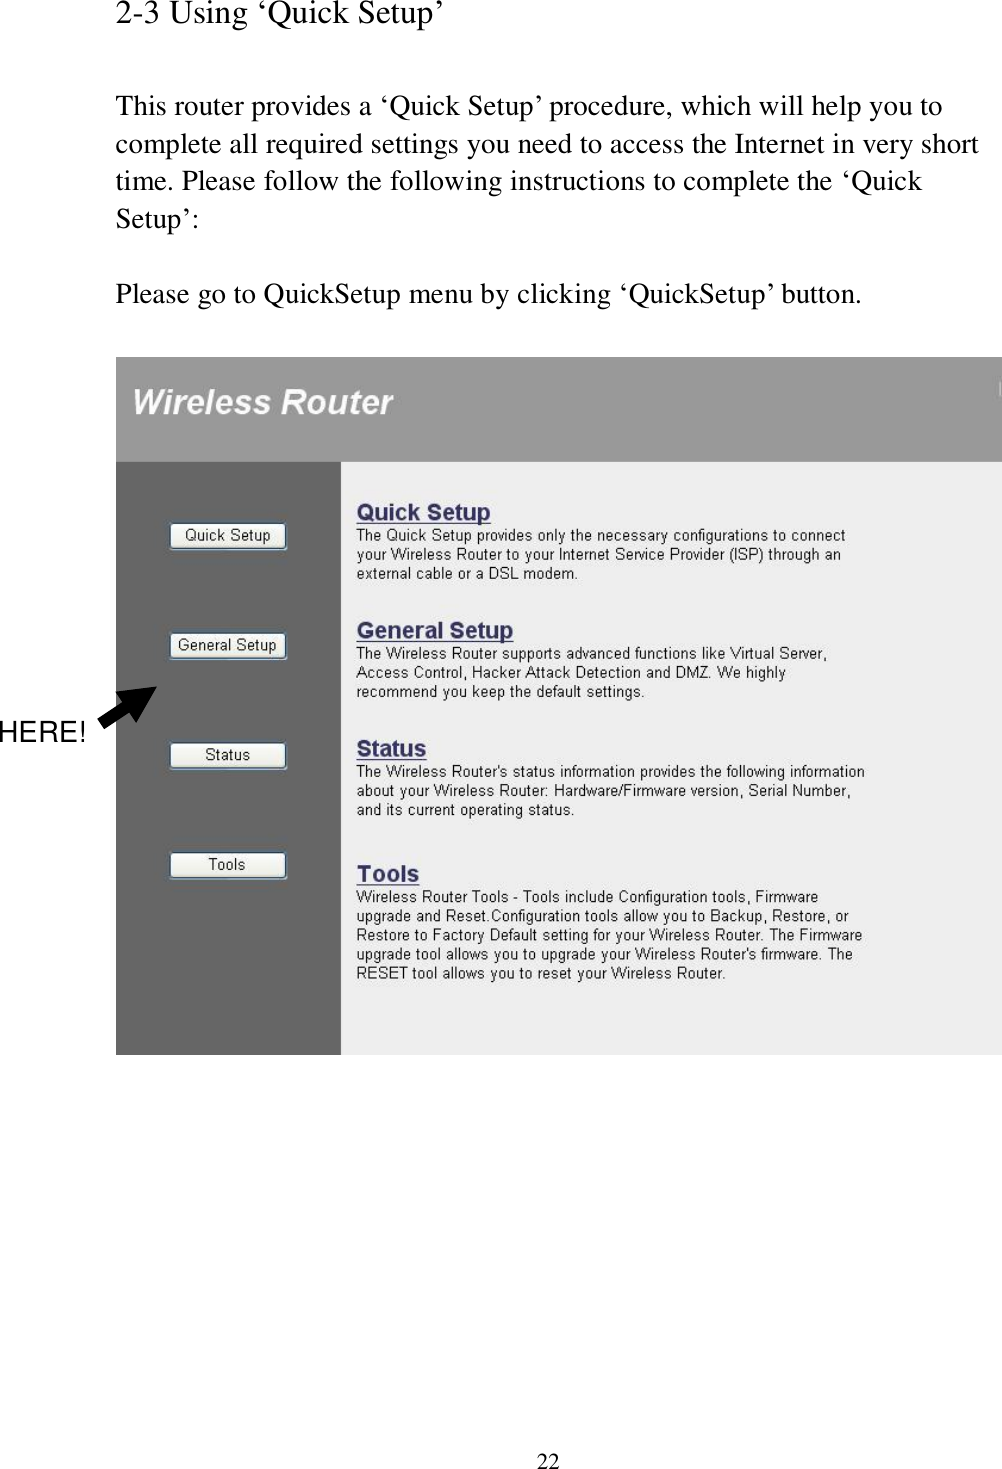 22 2-3 Using „Quick Setup‟  This router provides a „Quick Setup‟ procedure, which will help you to complete all required settings you need to access the Internet in very short time. Please follow the following instructions to complete the „Quick Setup‟:  Please go to QuickSetup menu by clicking „QuickSetup‟ button.            HERE! 